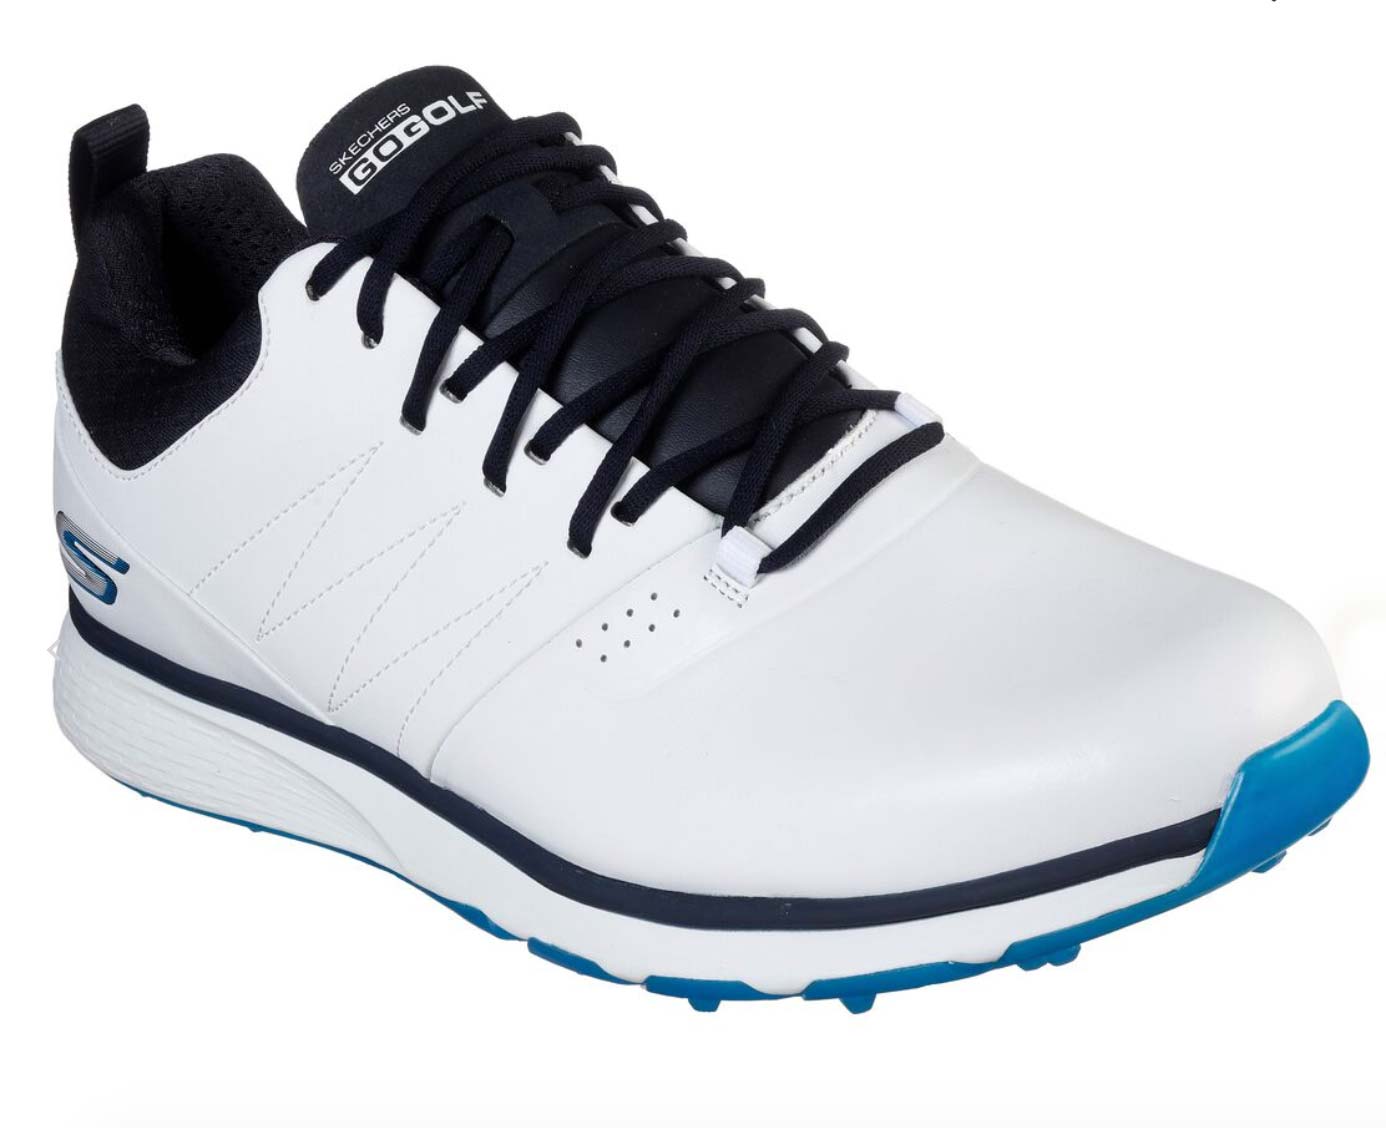 Best golf shoes for 2021: 5 pairs of 